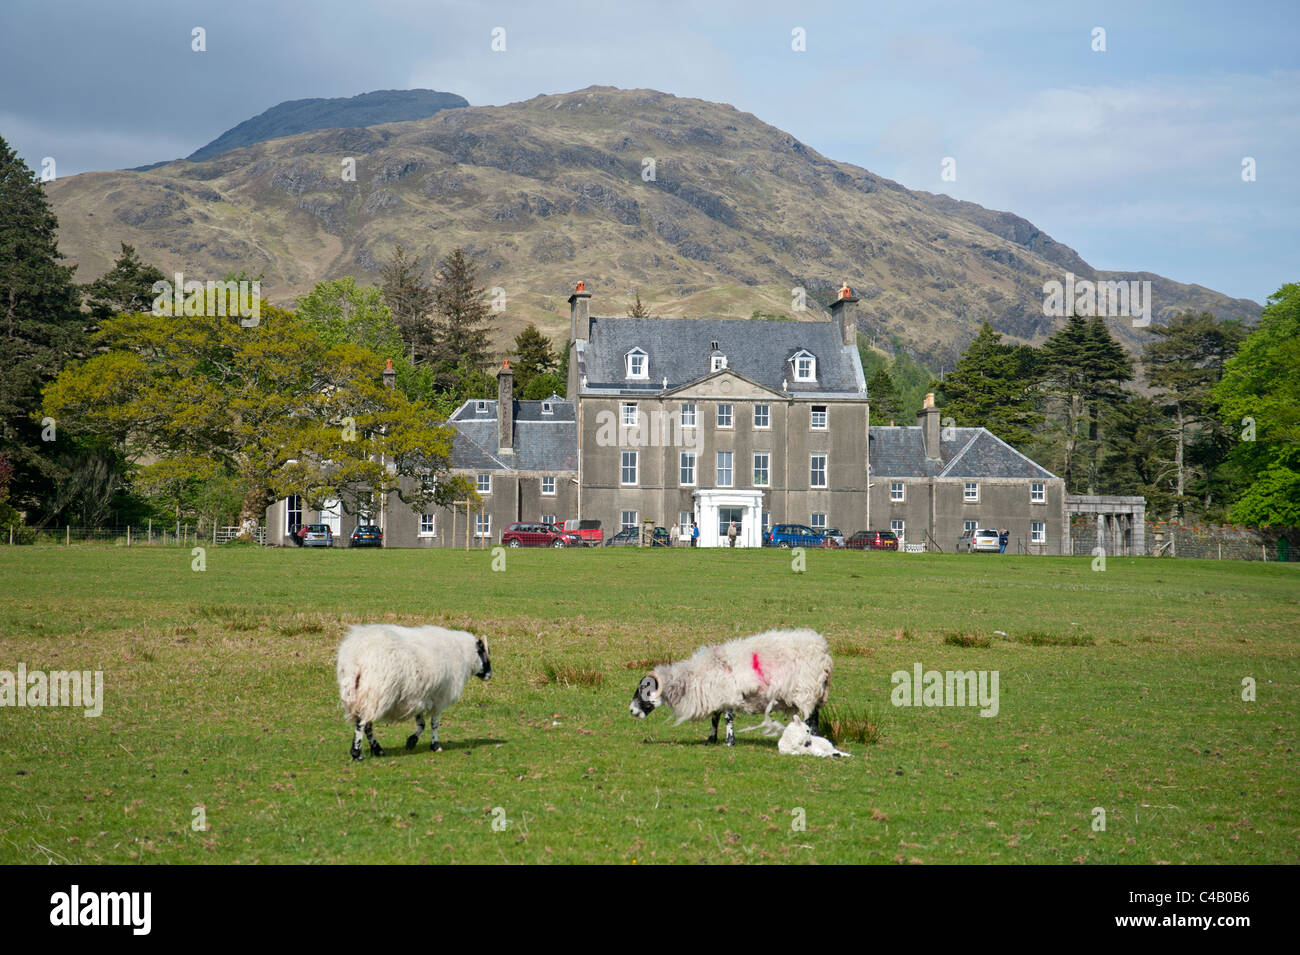 Sheep graze peacefully in front of Lochbuie House, on the west coast of the isle of Mull, Scotland.  SCO 7142 Stock Photo